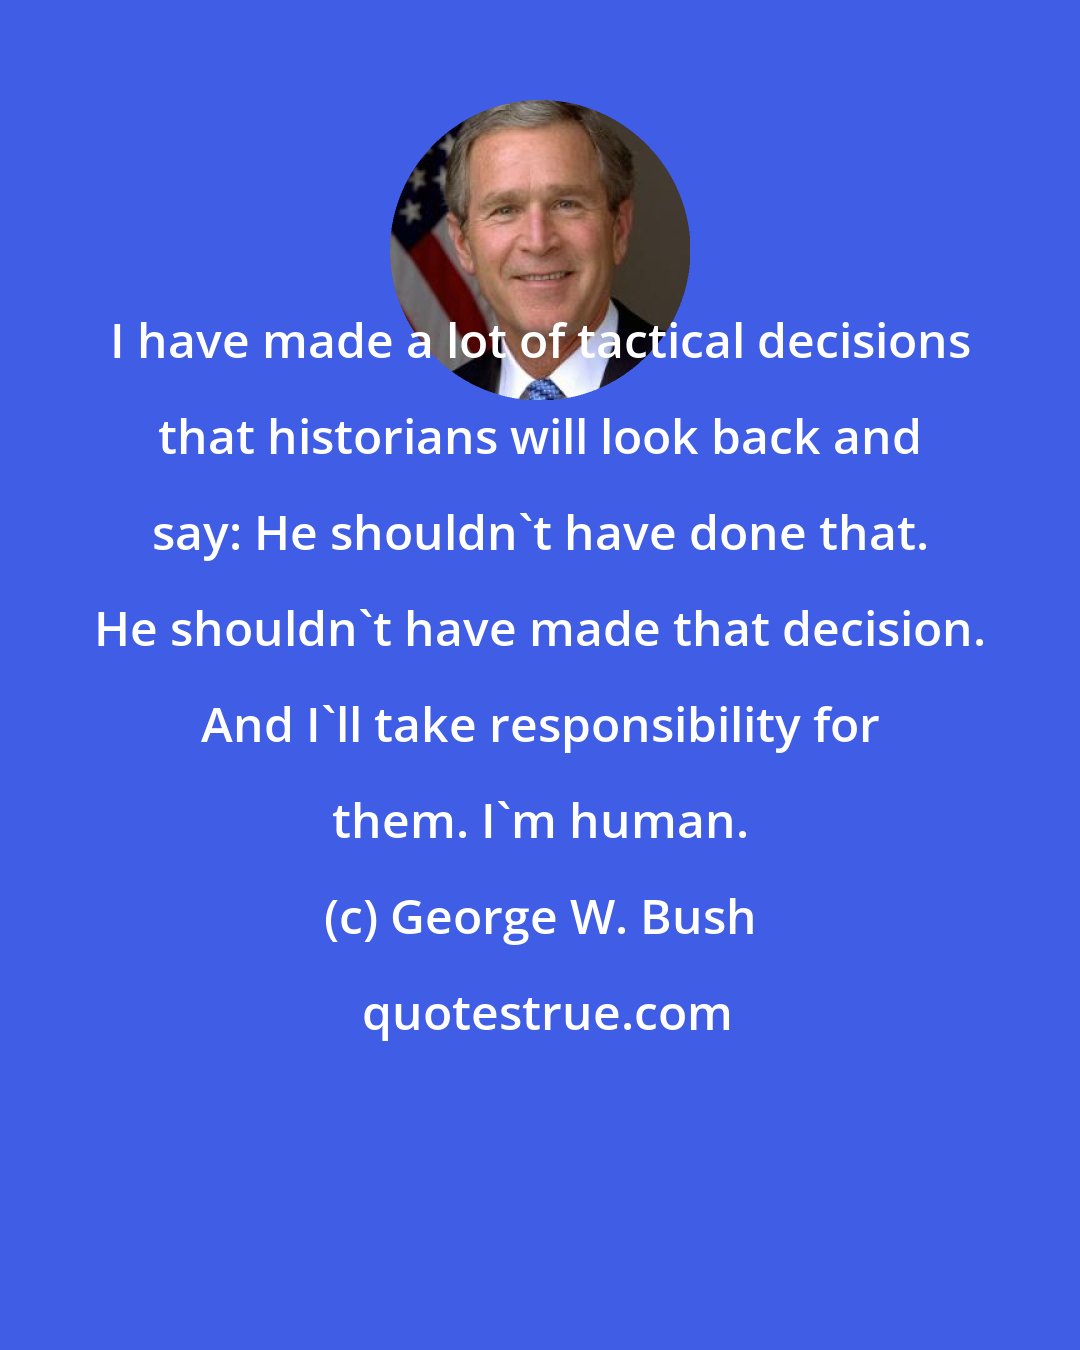 George W. Bush: I have made a lot of tactical decisions that historians will look back and say: He shouldn't have done that. He shouldn't have made that decision. And I'll take responsibility for them. I'm human.